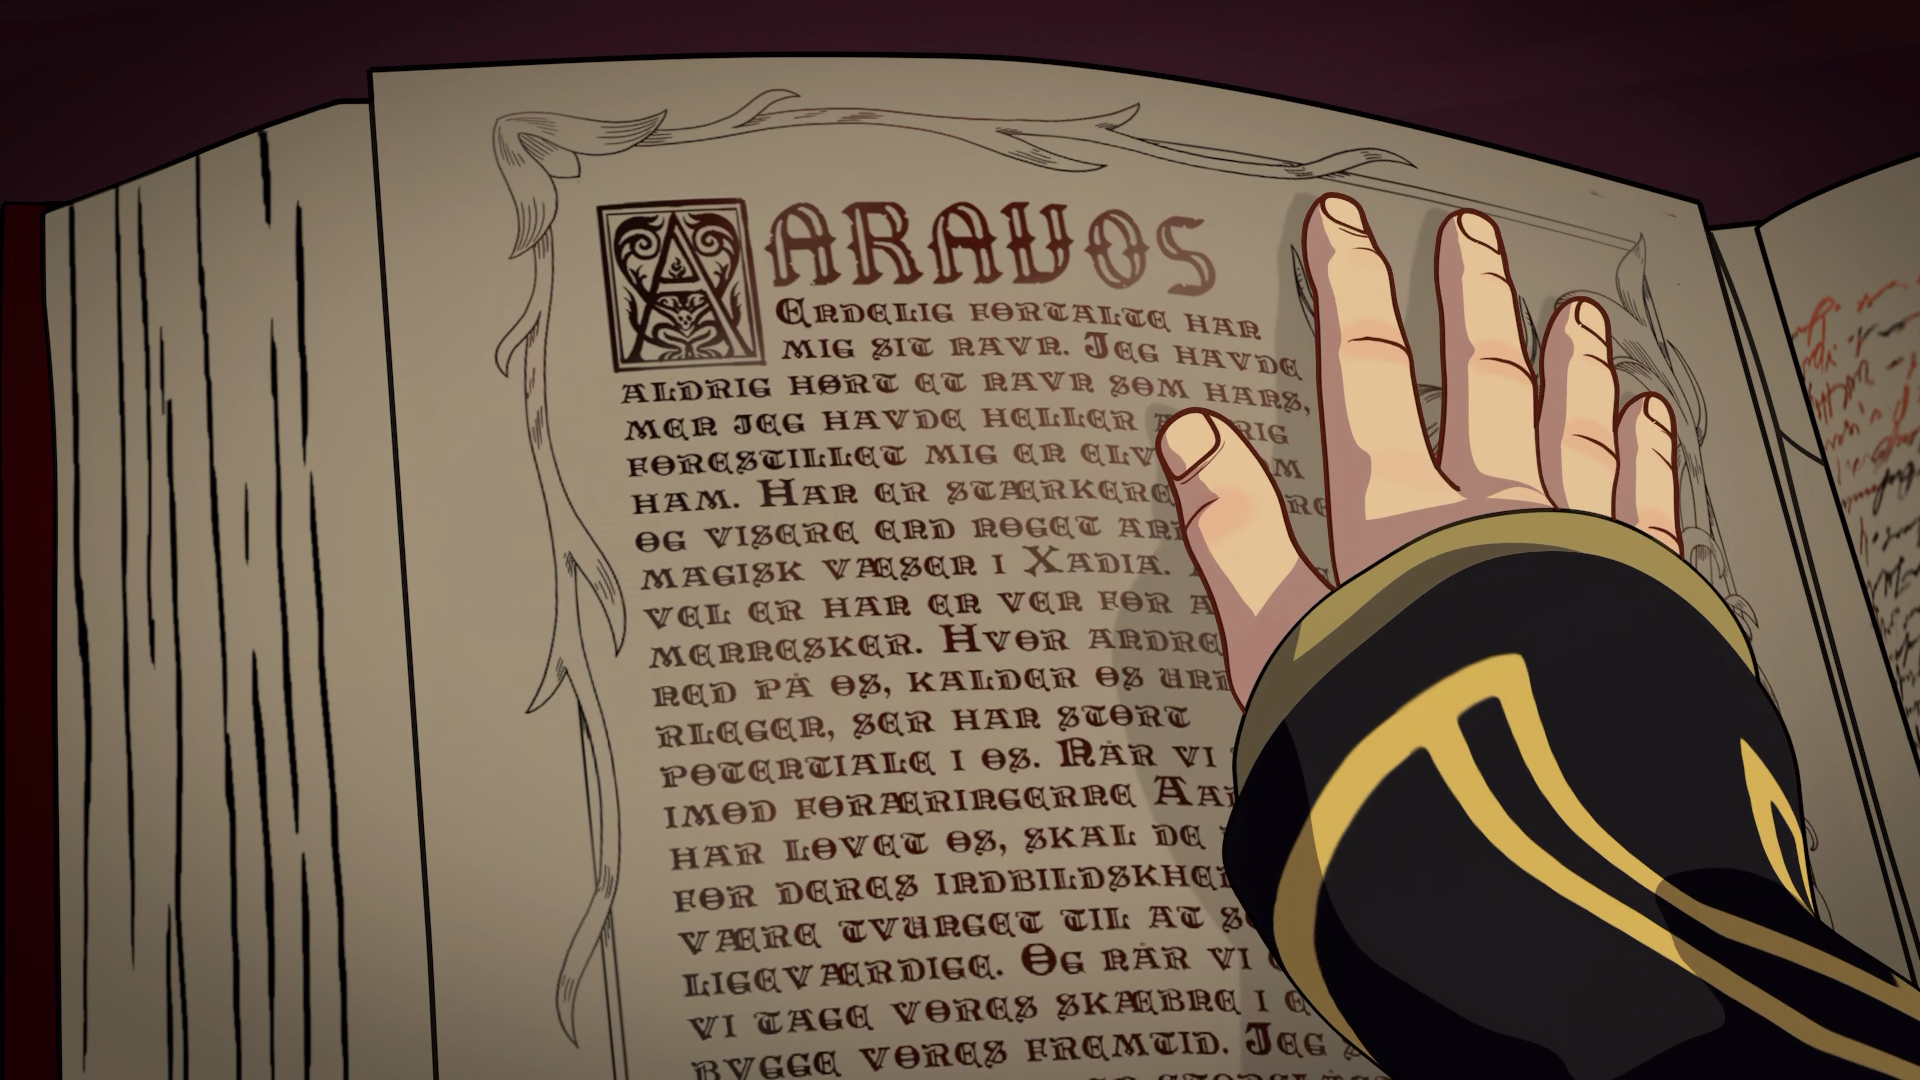 Danish text about Aaravos in s02e08 (10:32)